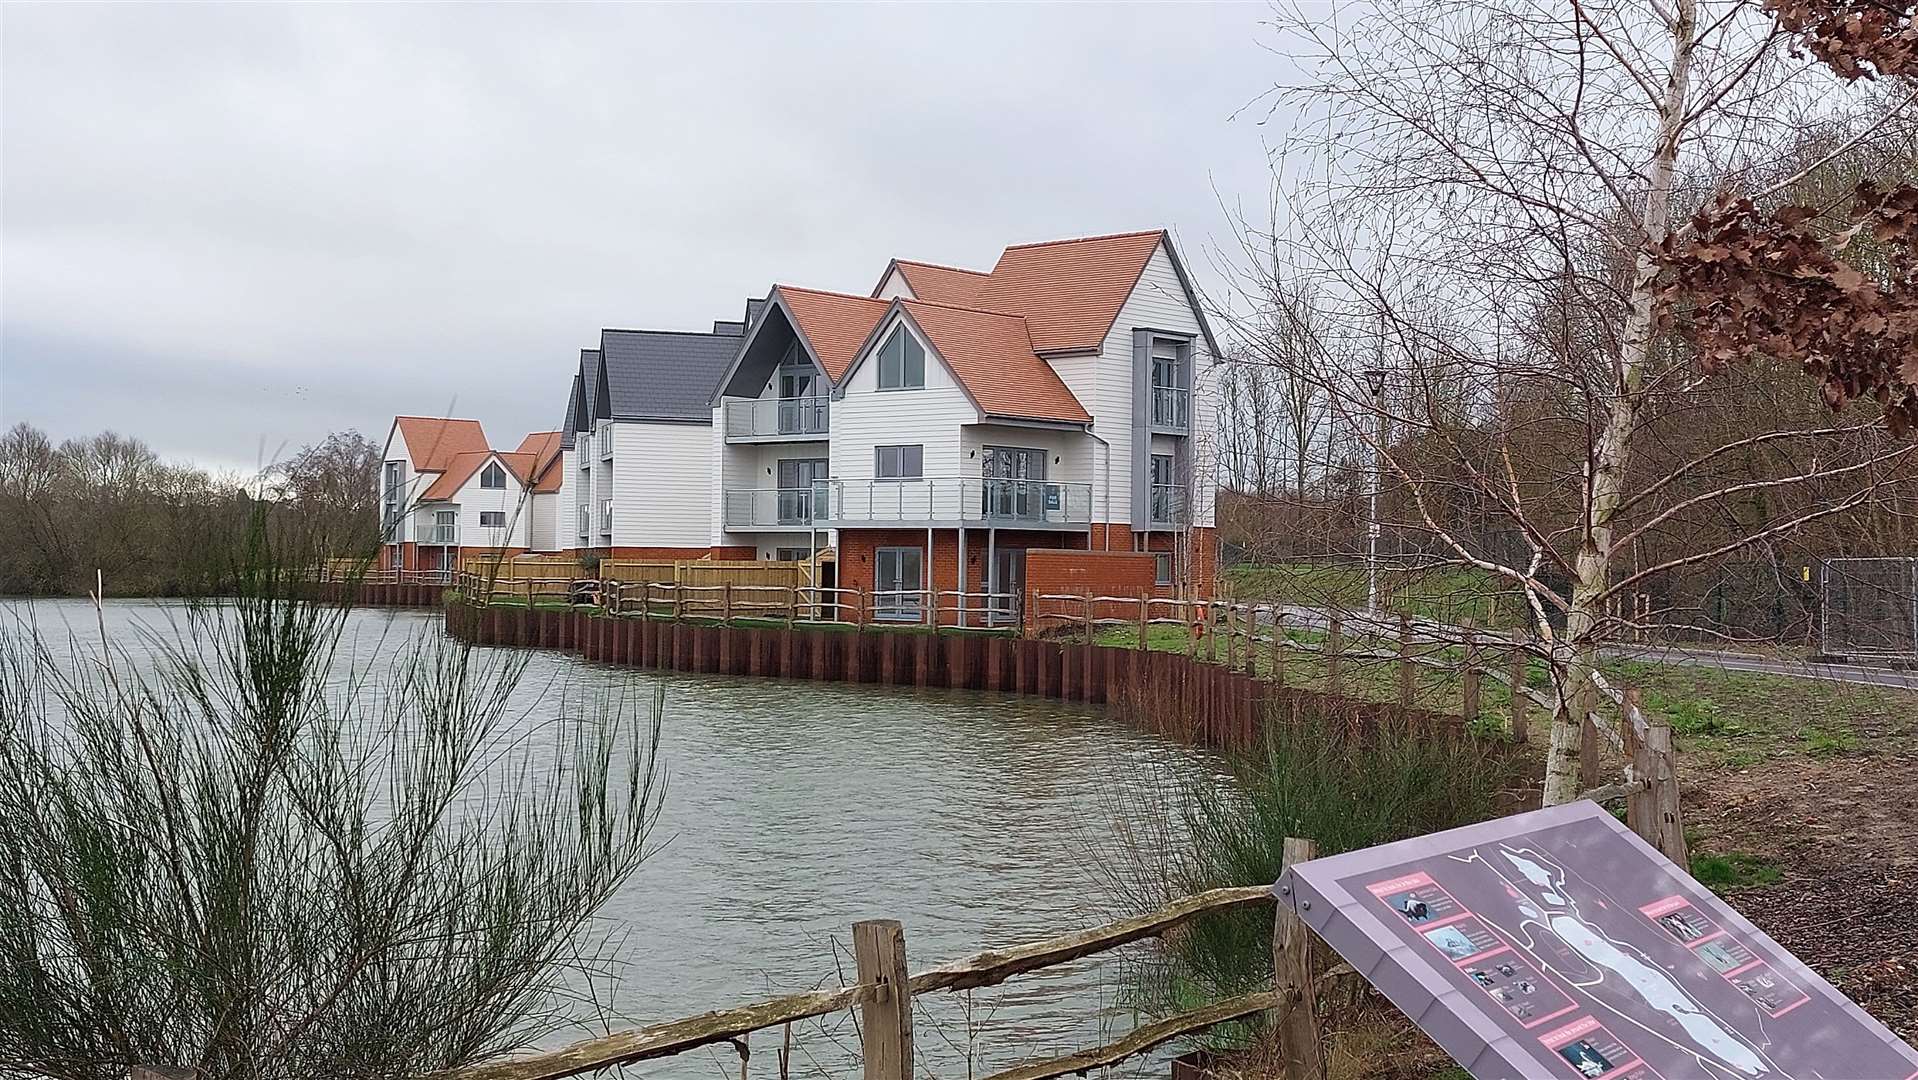 How some of the homes in Conningbrook Lakes currently look